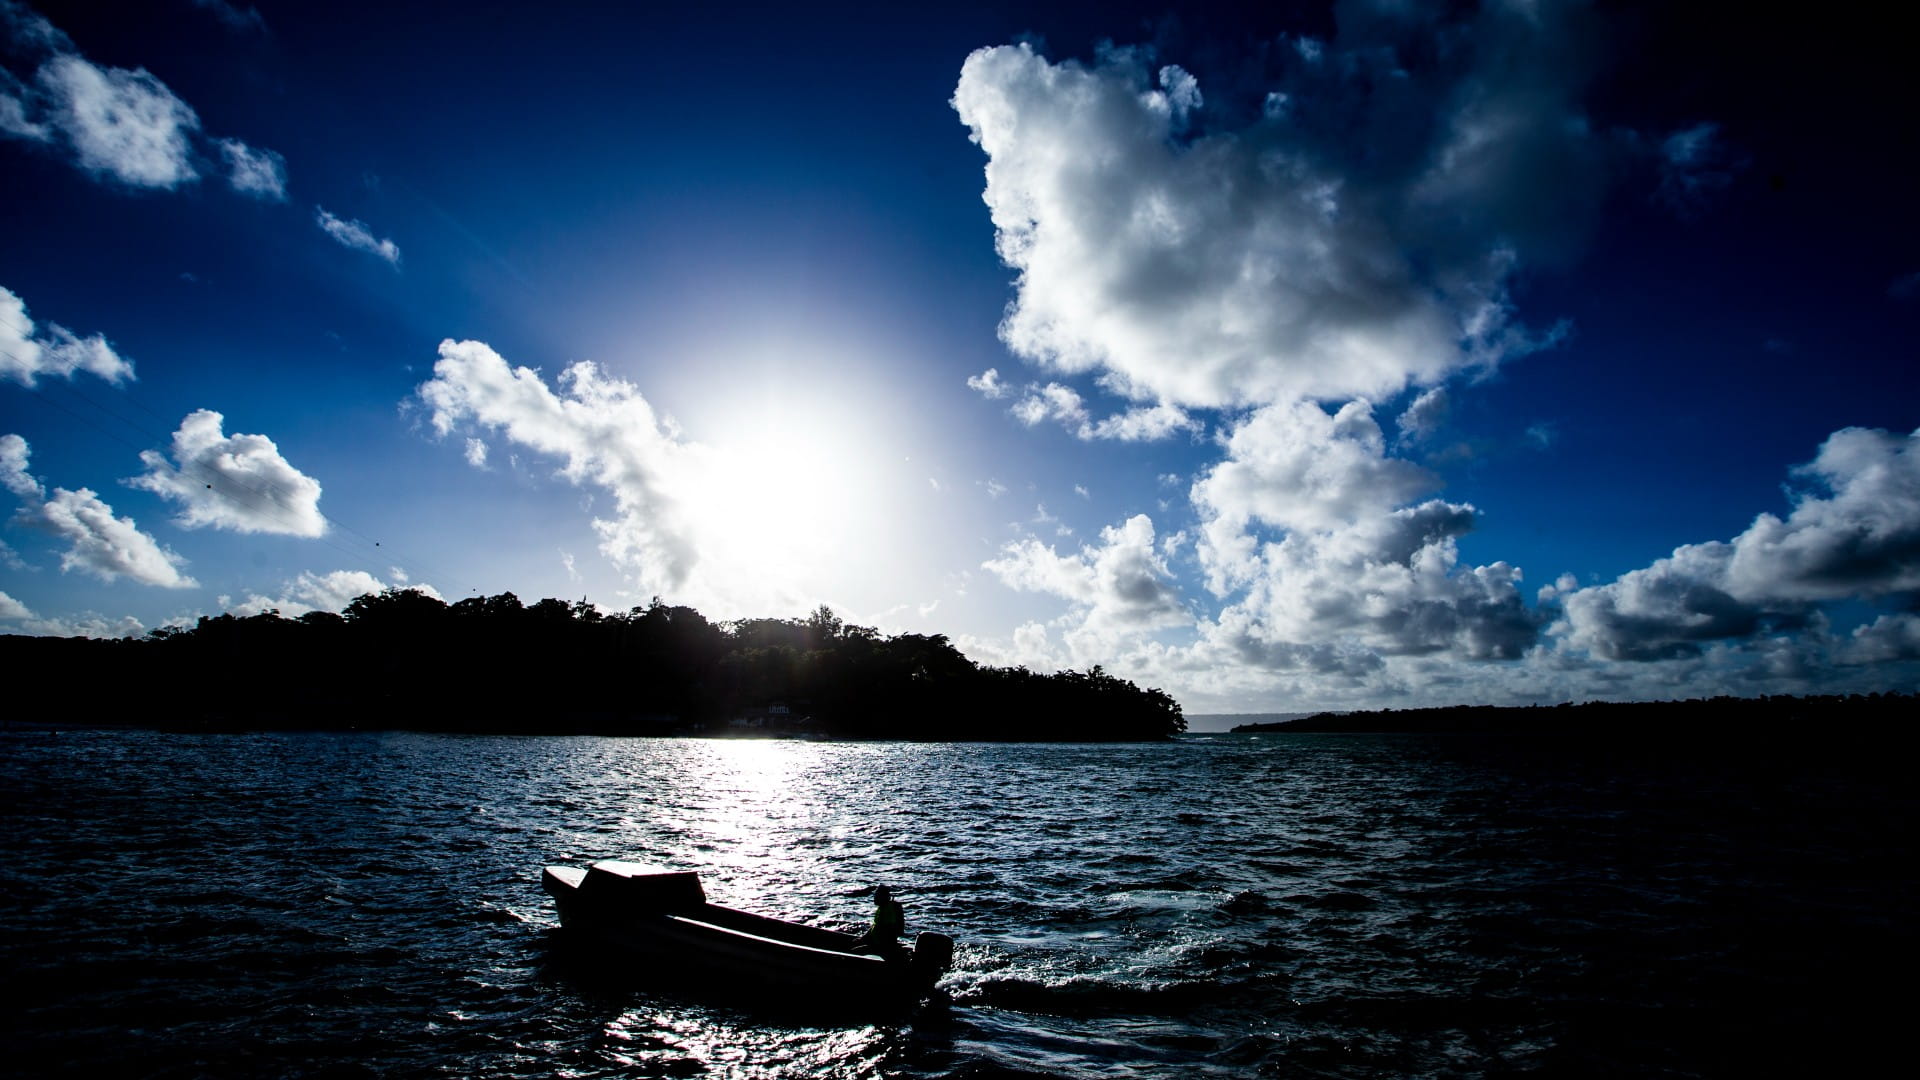 A fishing boat surrounded by water with a Pacific island in the background. Photo: Paul Jones